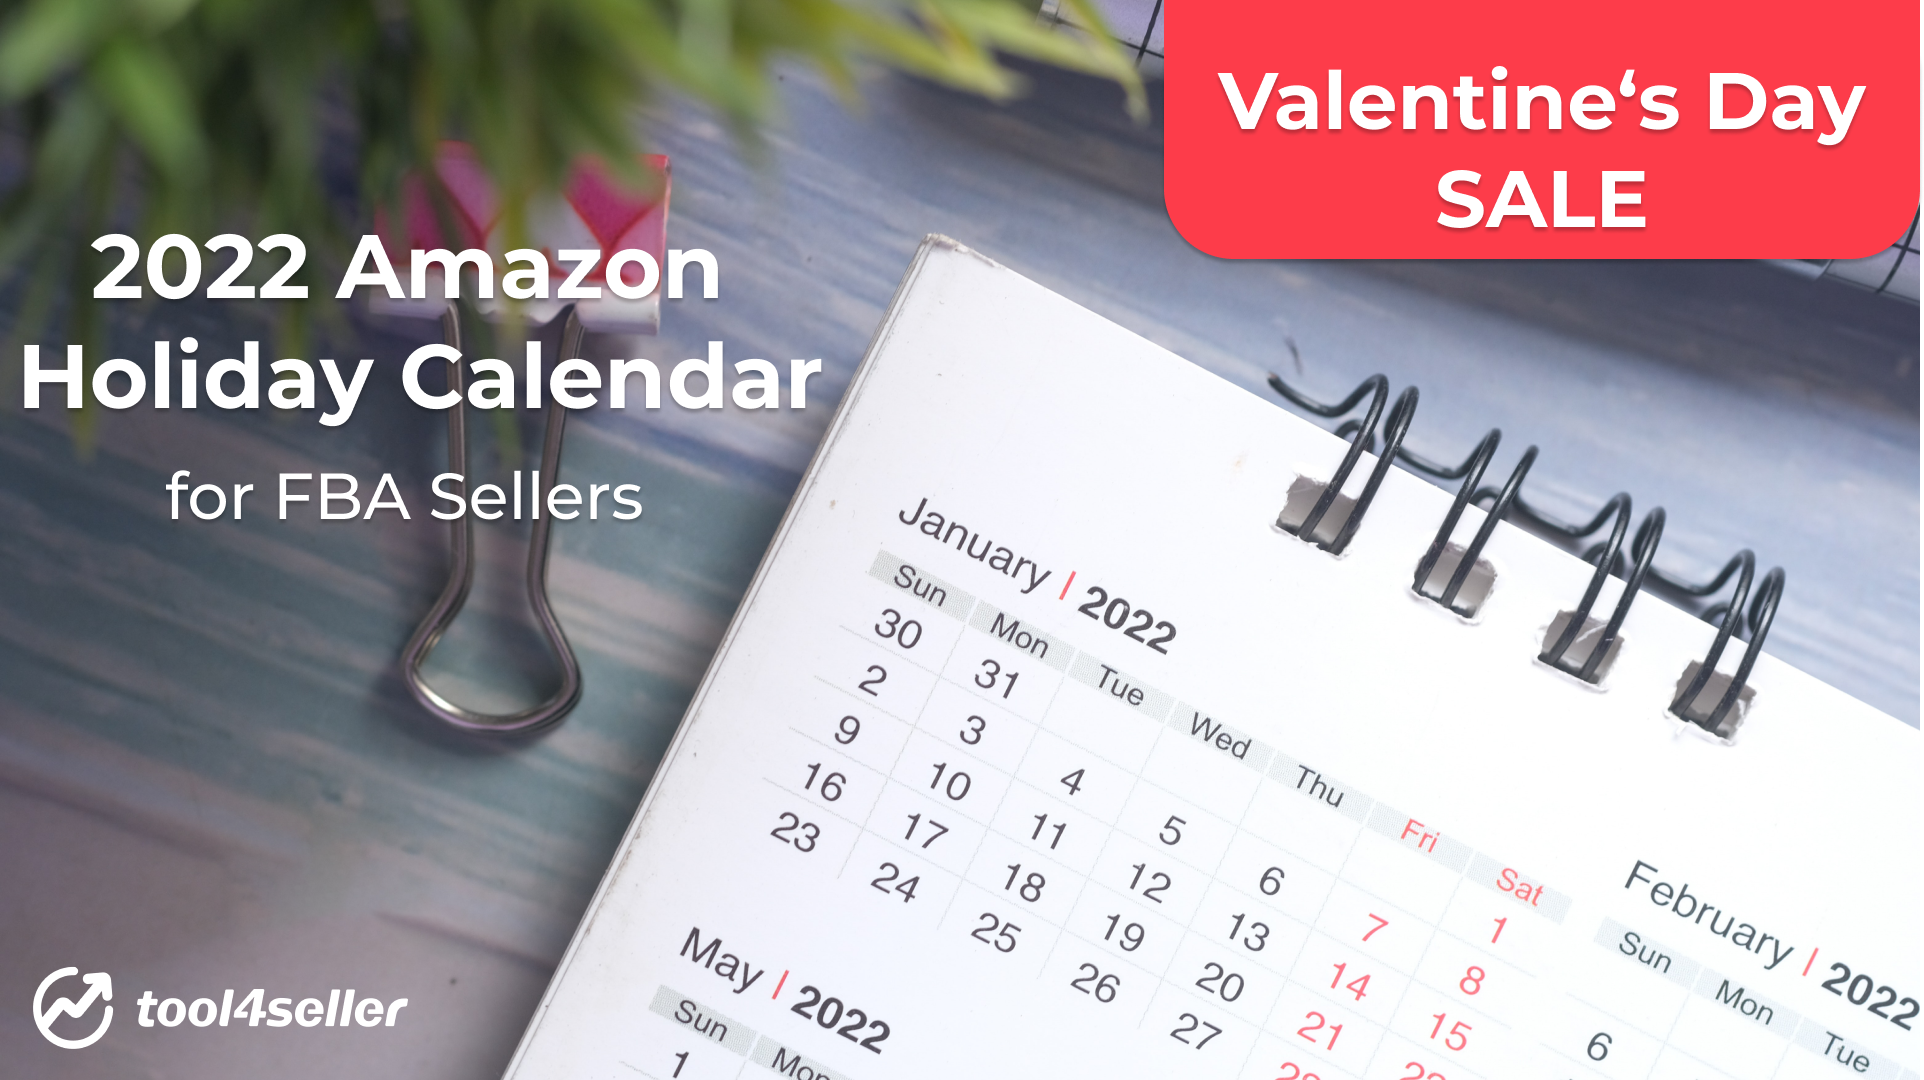 The Amazon 2022 Important Holiday Calendar for FBA Sellers